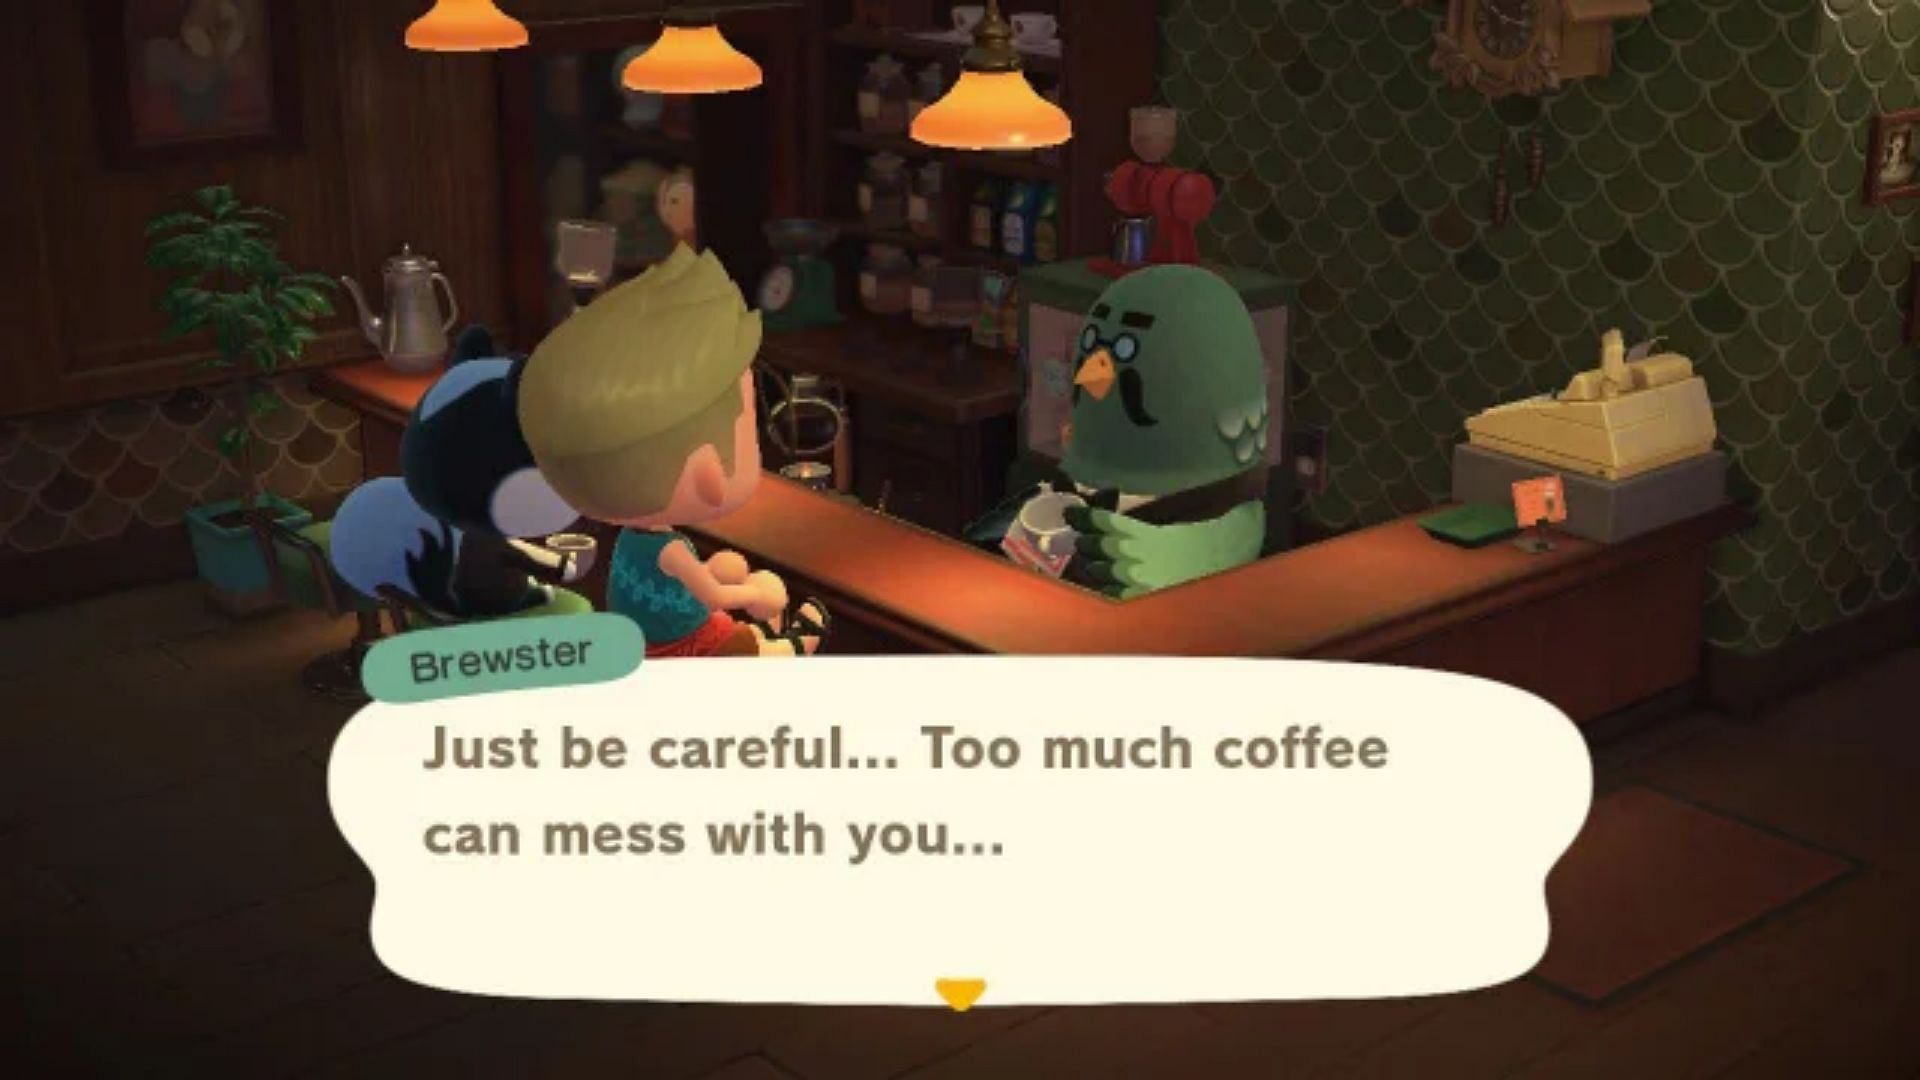 Animal Crossing: New Horizons players can drink as much coffee as they want in the game (Image via r/AnimalCrossing/Reddit)